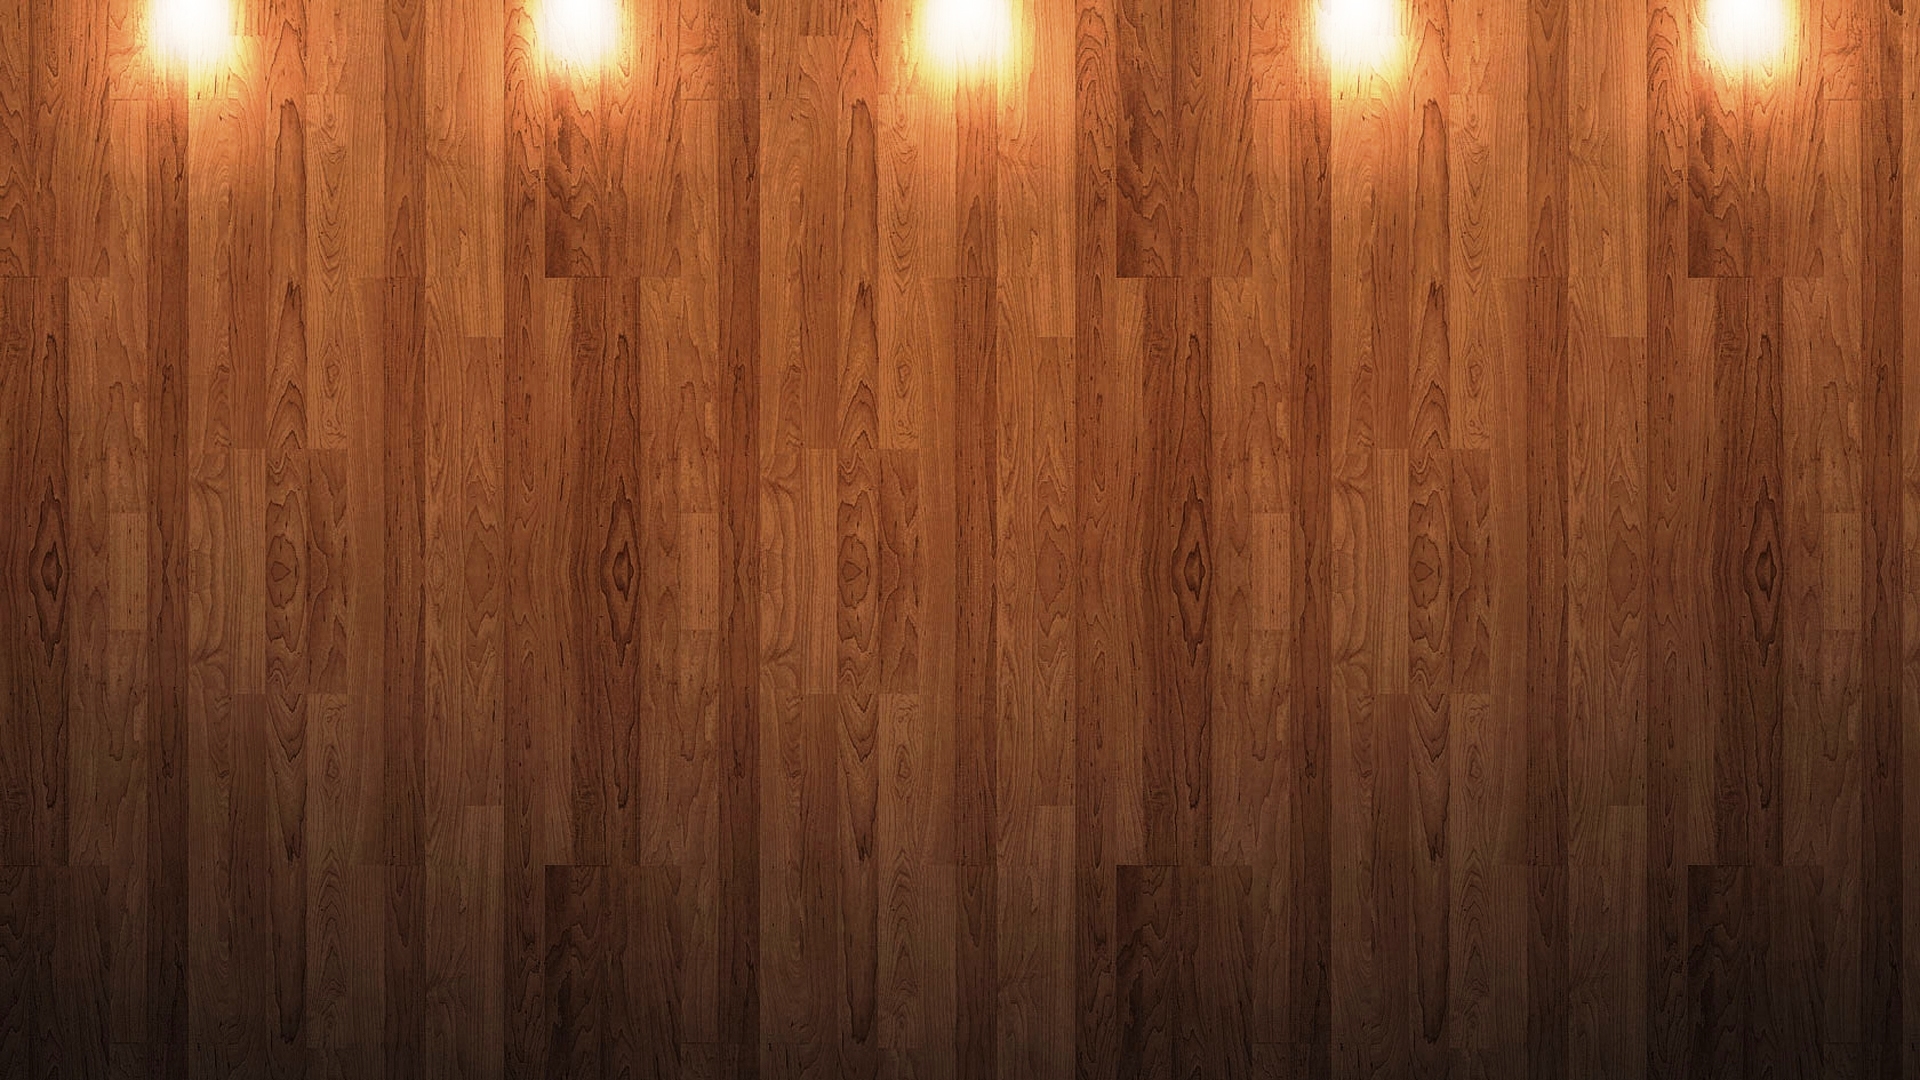 Wood Background Hd, Buy Now, Deals, 54% OFF, 